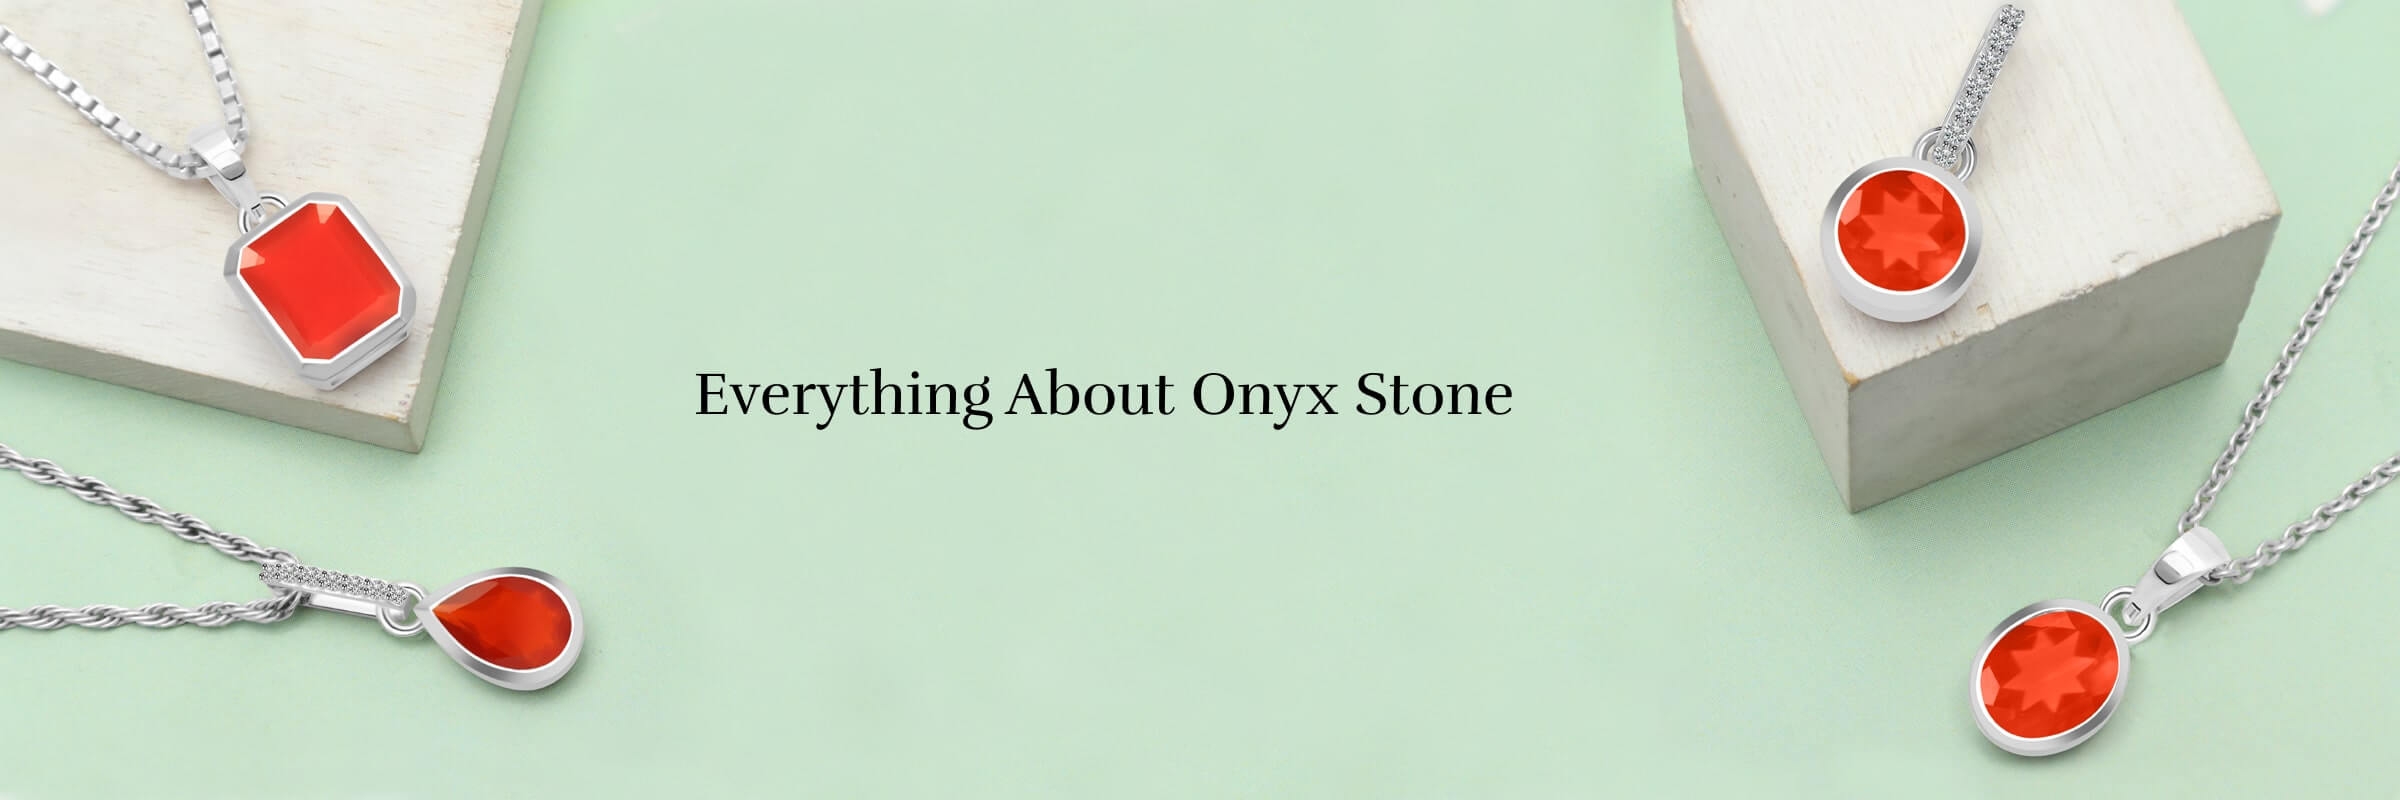 Onyx Stone Meaning: Healing Properties, Types, Uses, & Benefits 1